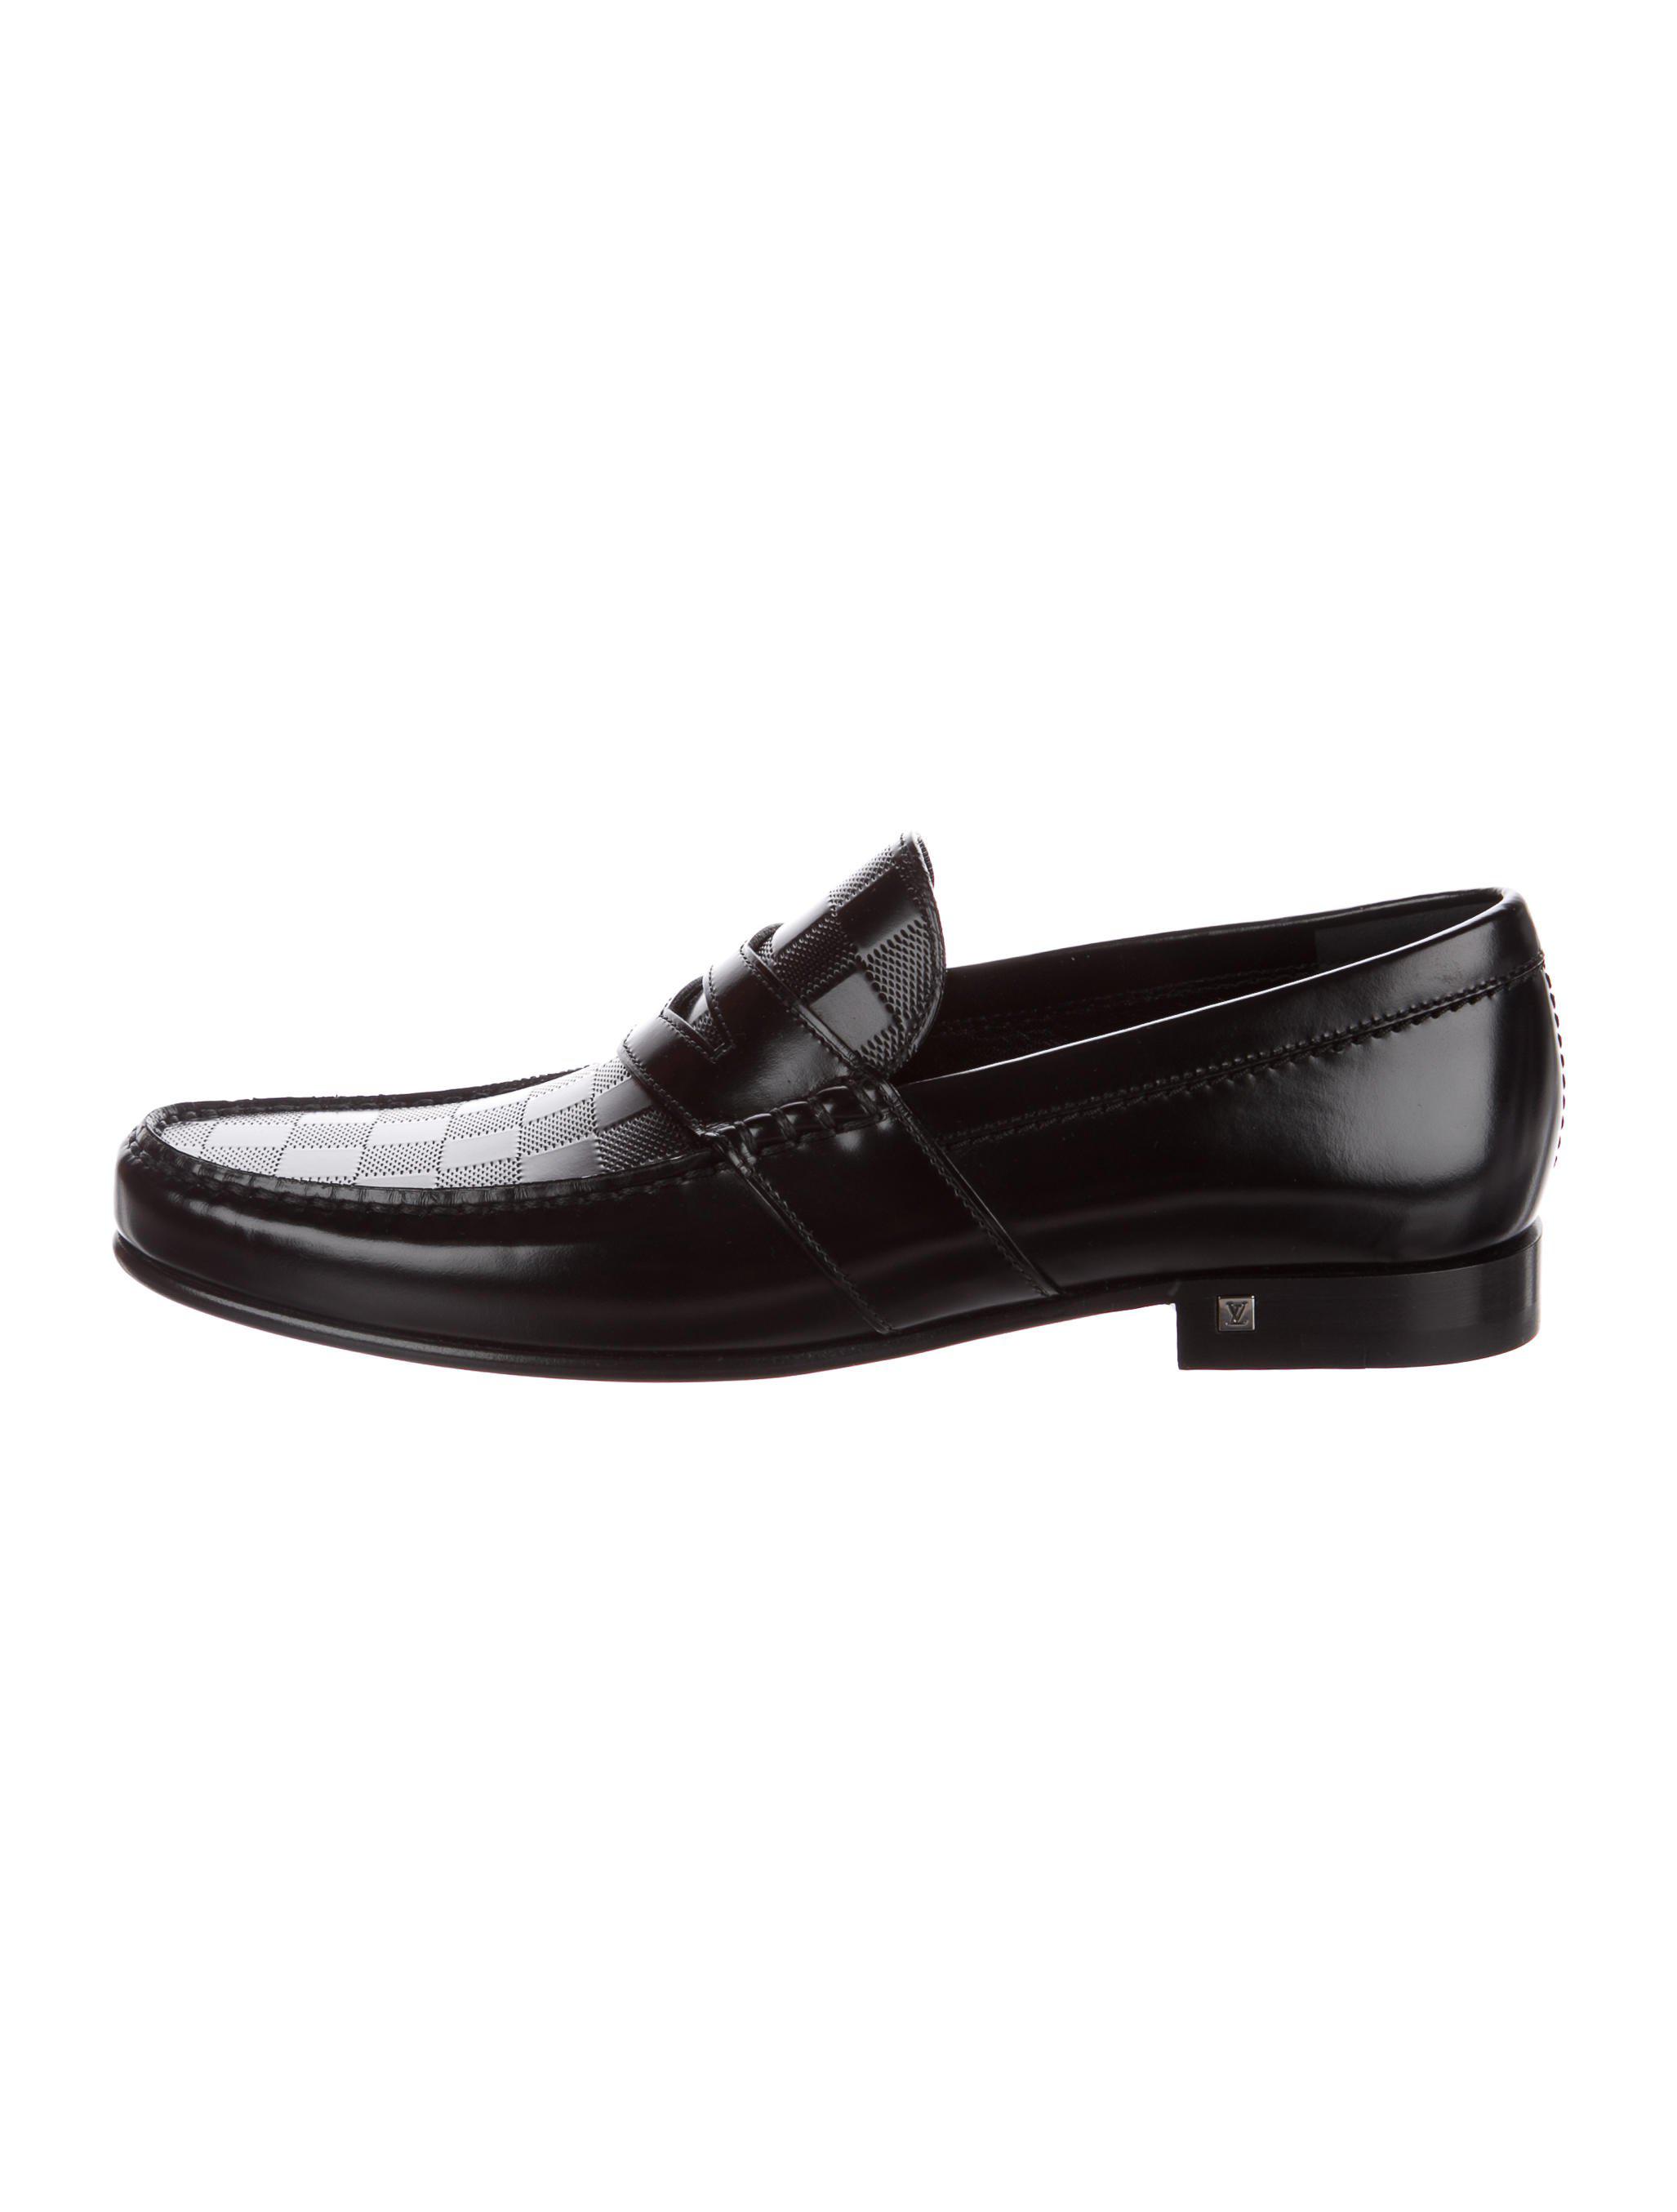 Louis Vuittons Men Loafers For Sale | IUCN Water